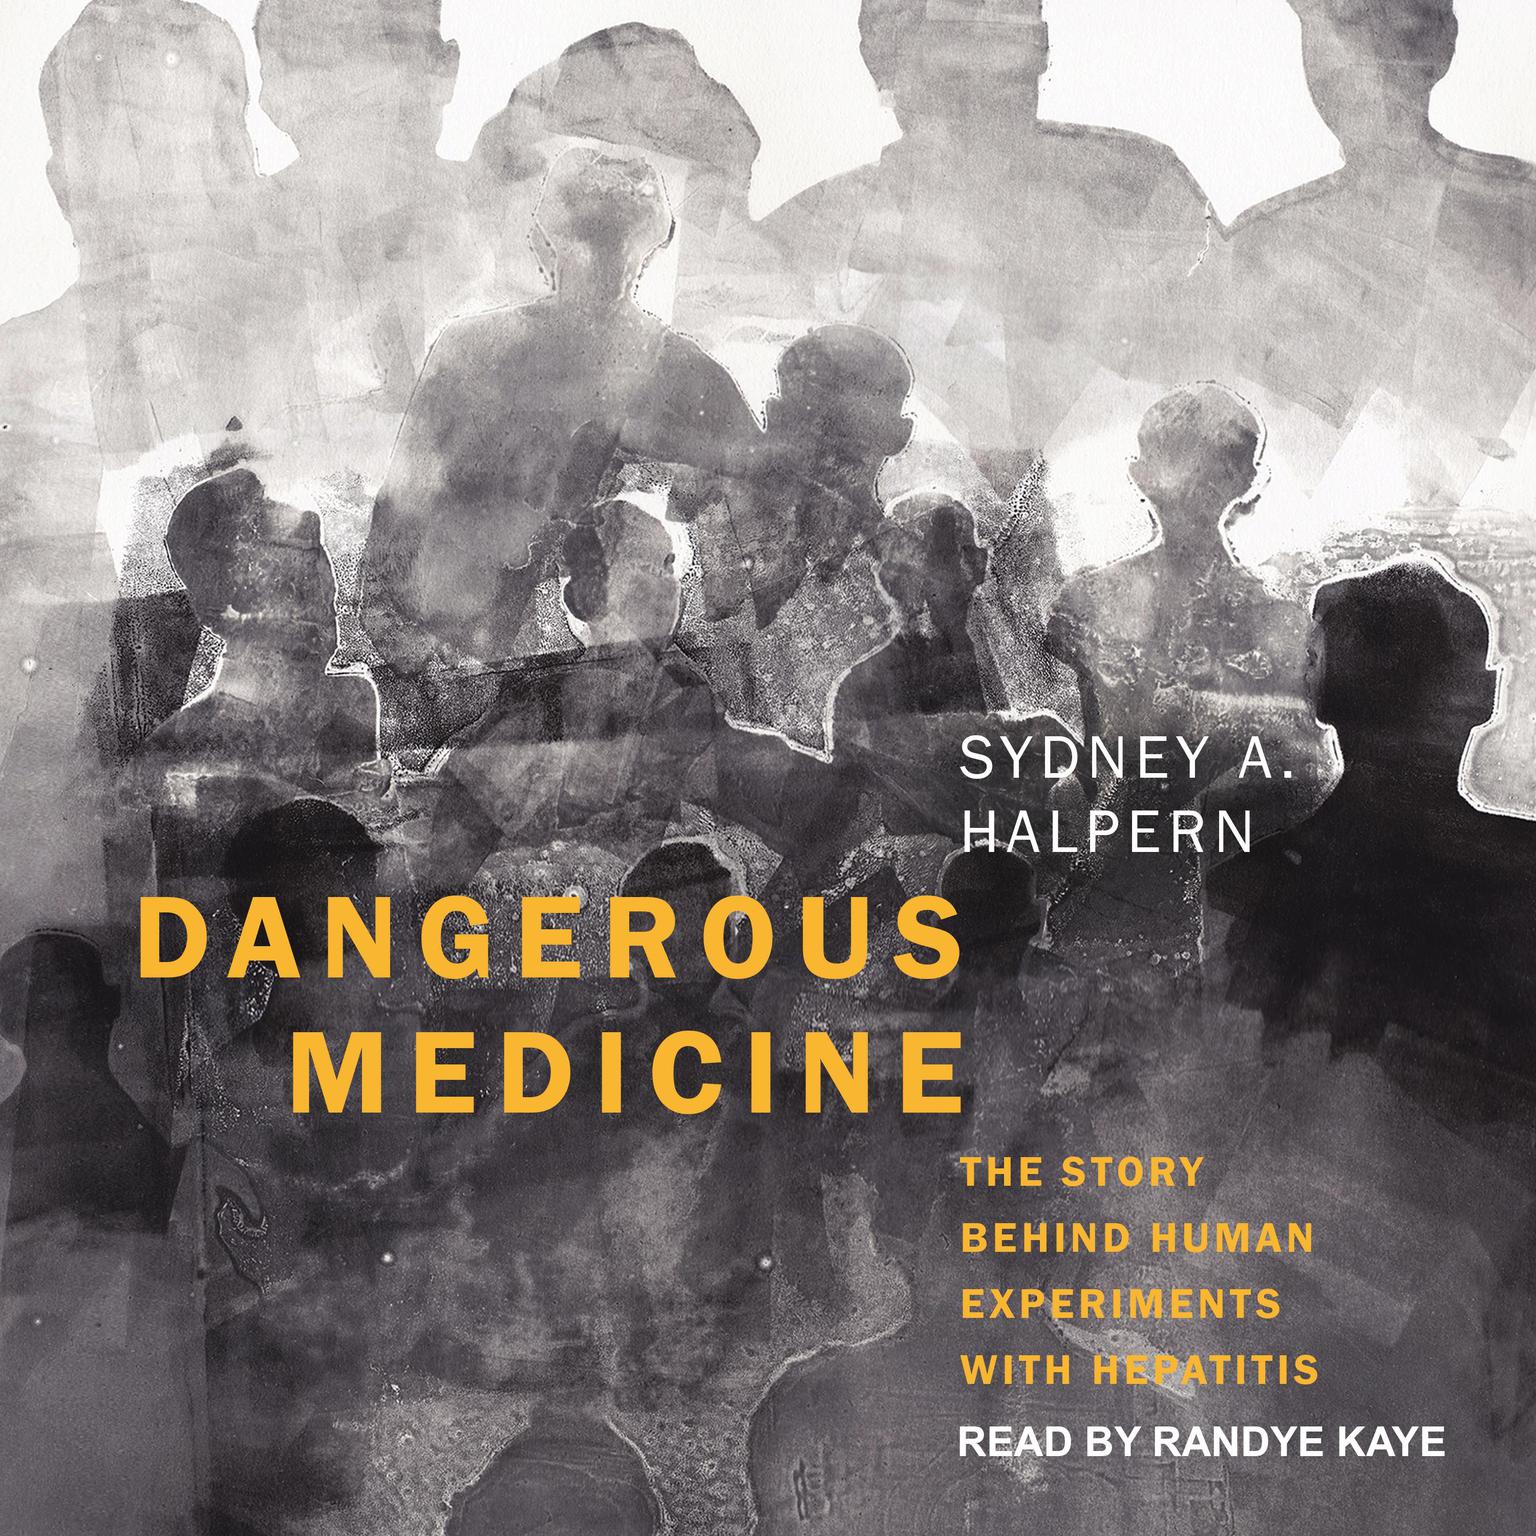 Dangerous Medicine: The Story Behind Human Experiments with Hepatitis Audiobook, by Sydney A. Halpern